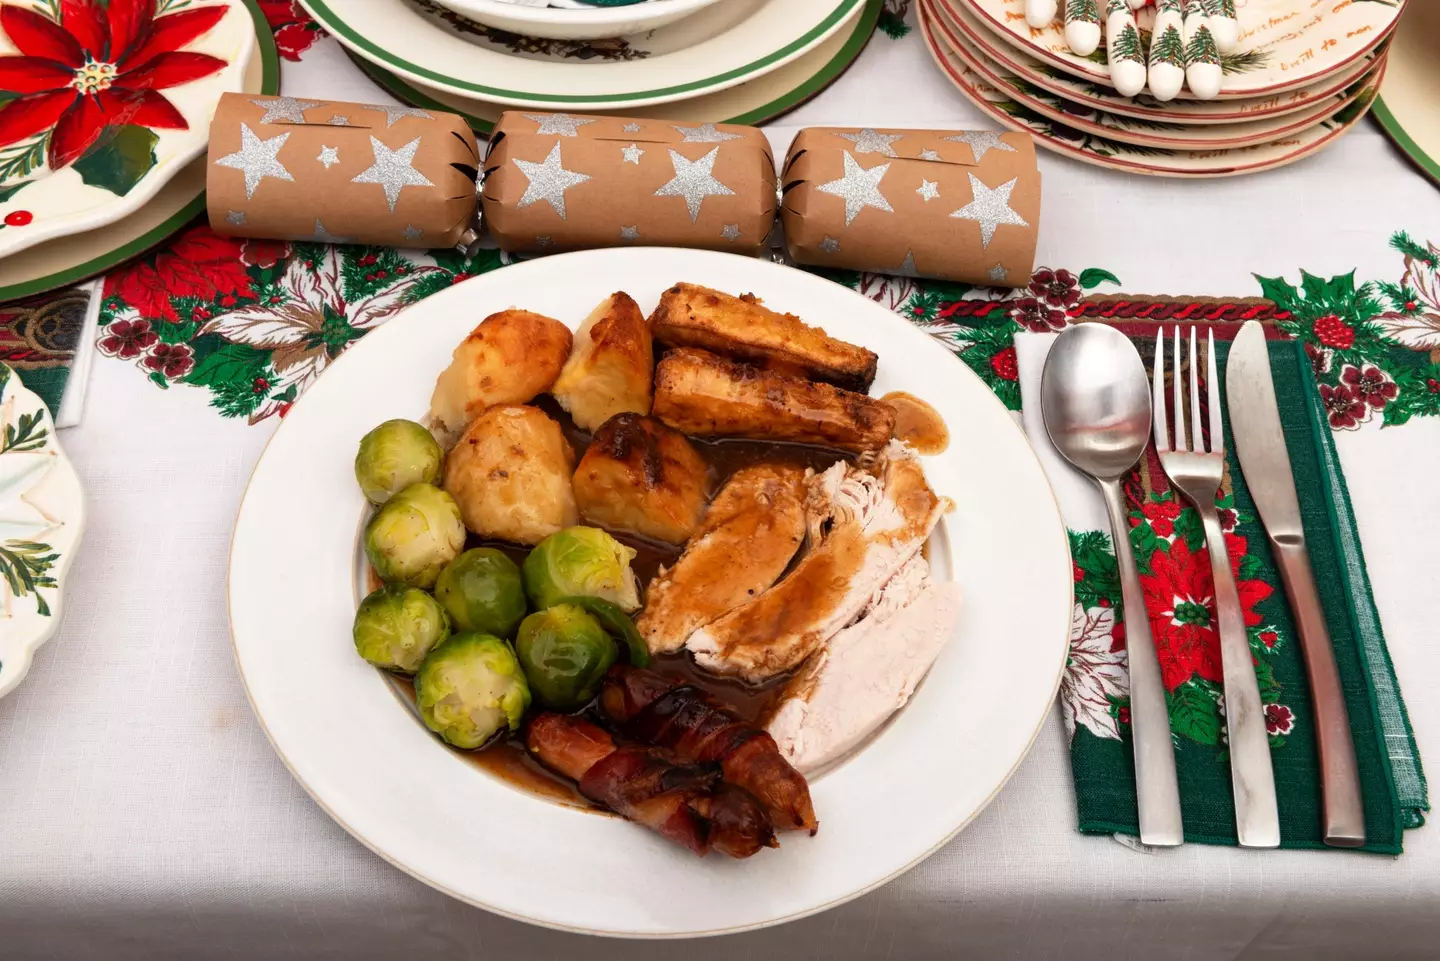 Christmas dinner is one of the most loved meals of the year.